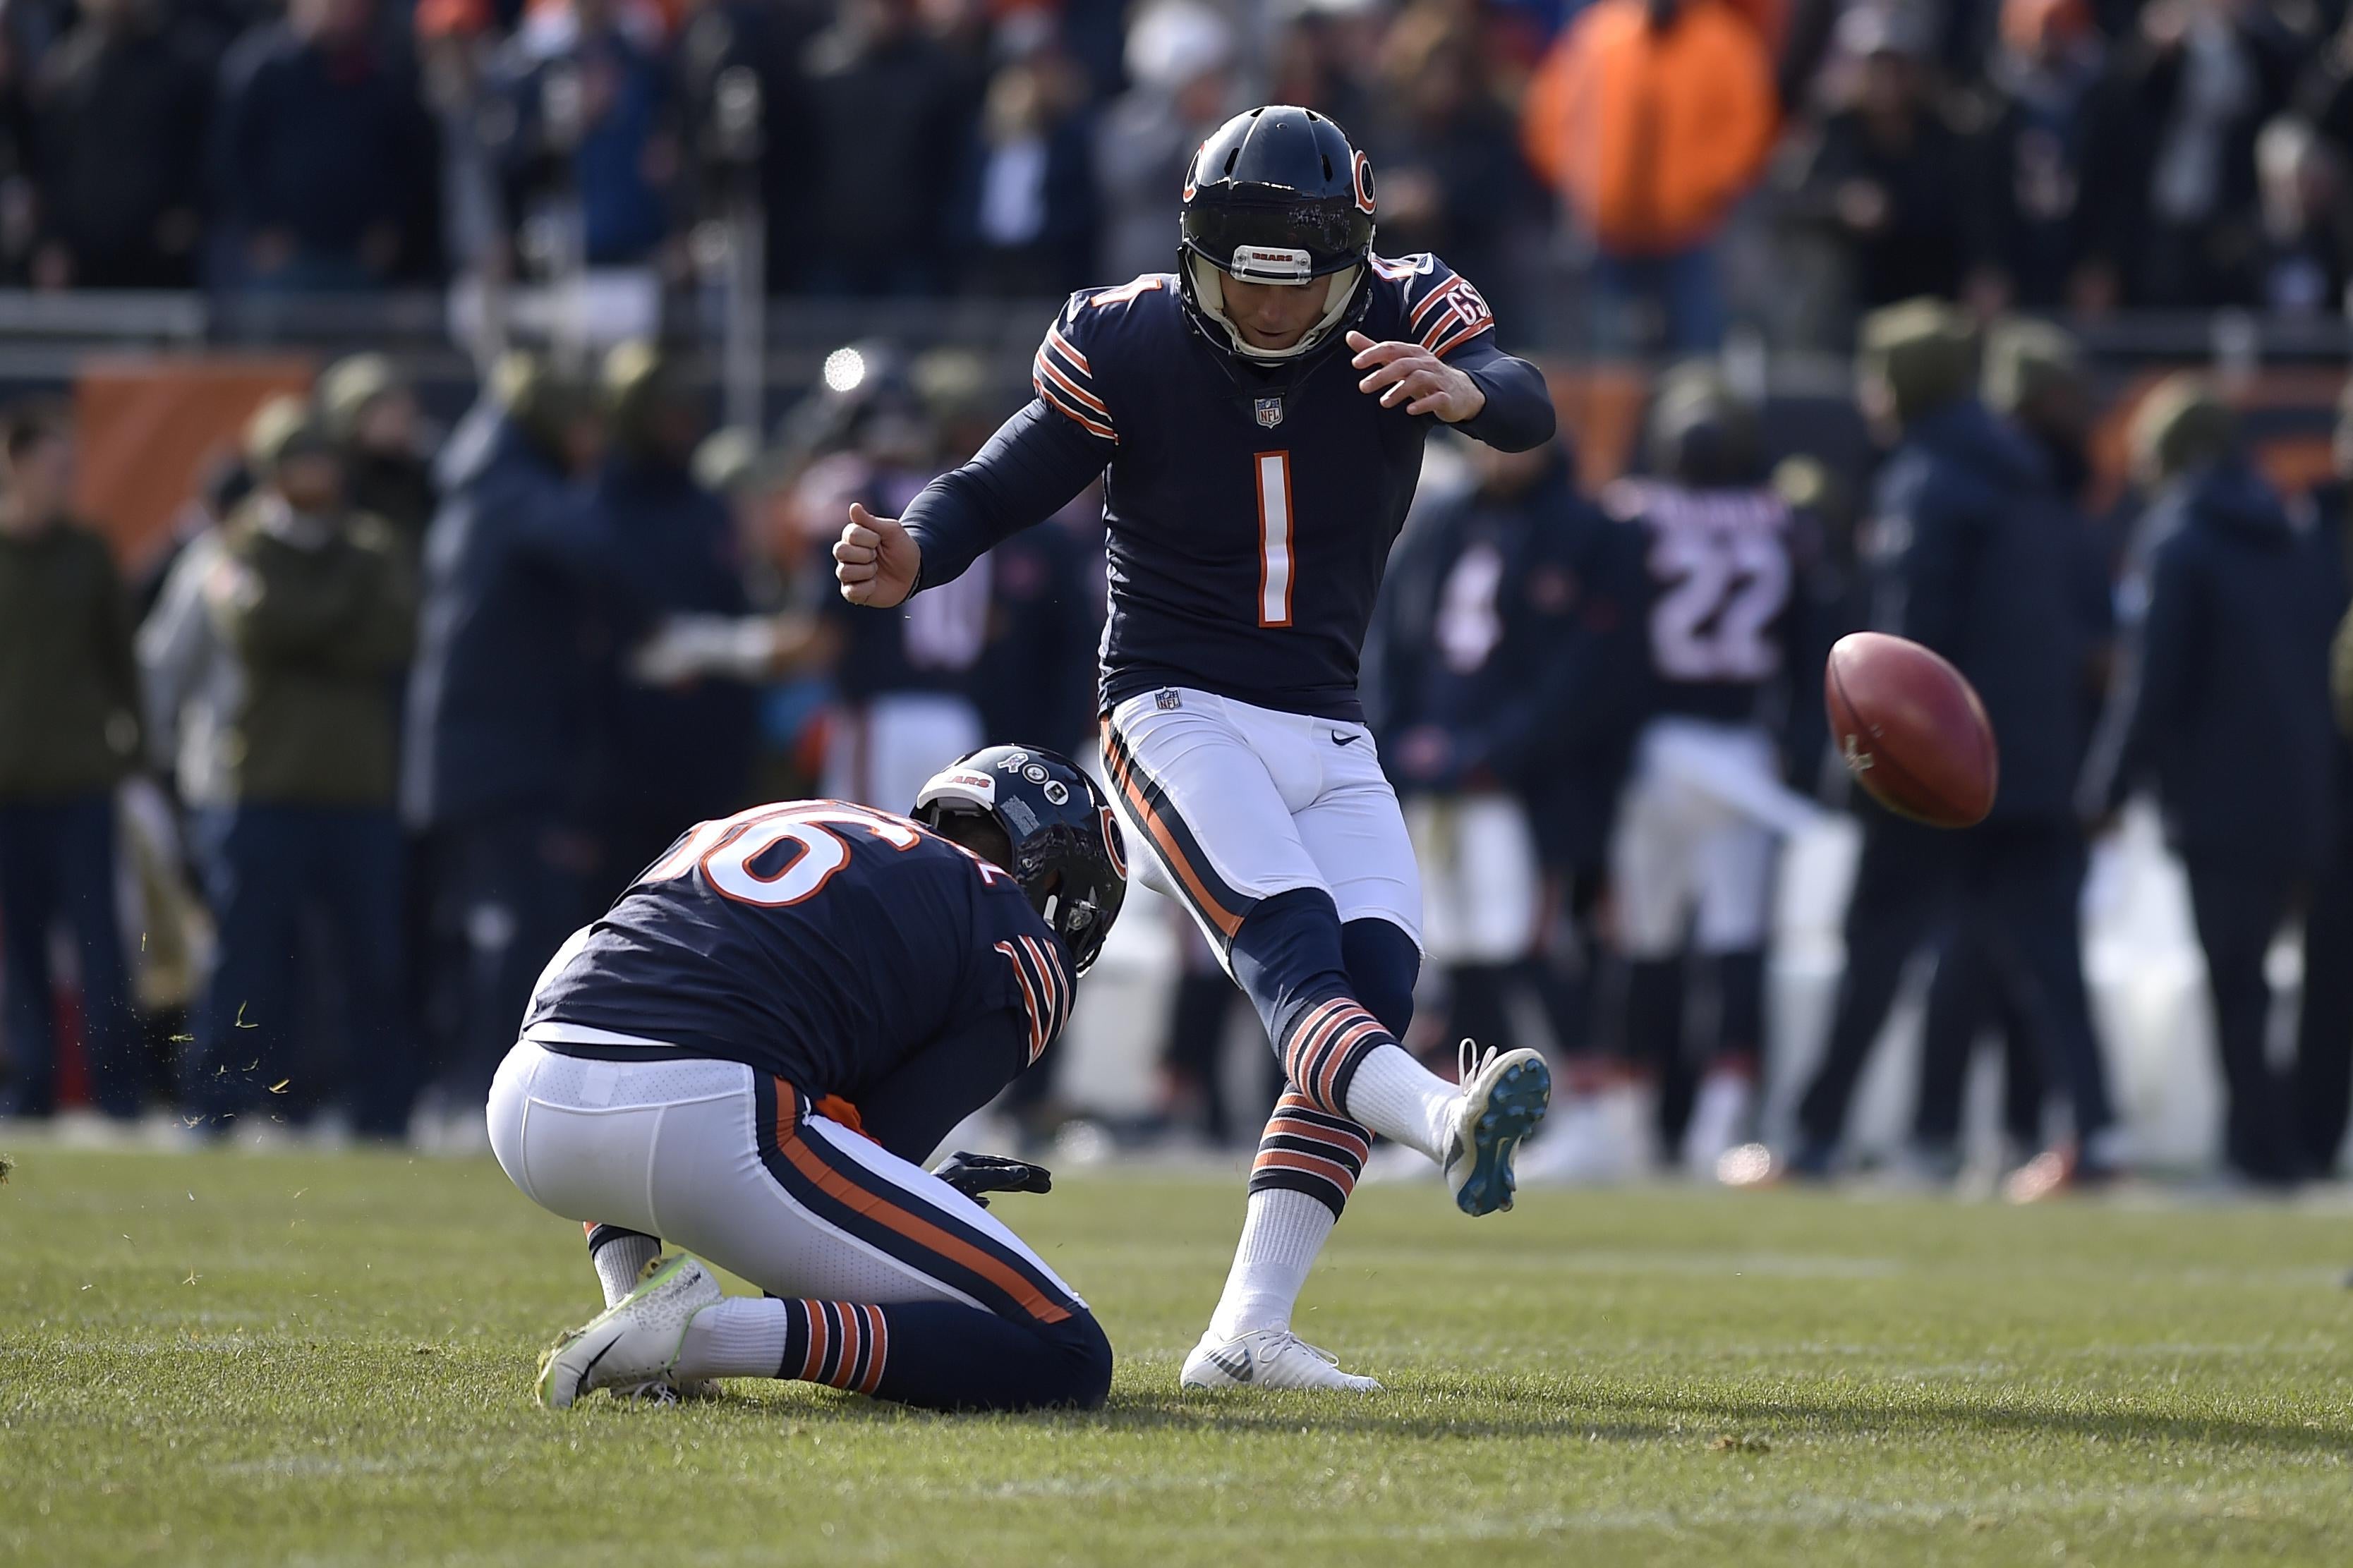 CHICAGO, IL - NOVEMBER 11:  Kicker Cody Parkey #1 of the Chicago Bears misses the field goal during the game against the Detroit Lions at Soldier Field on November 11, 2018 in Chicago, Illinois.  (Photo by Quinn Harris/Getty Images)